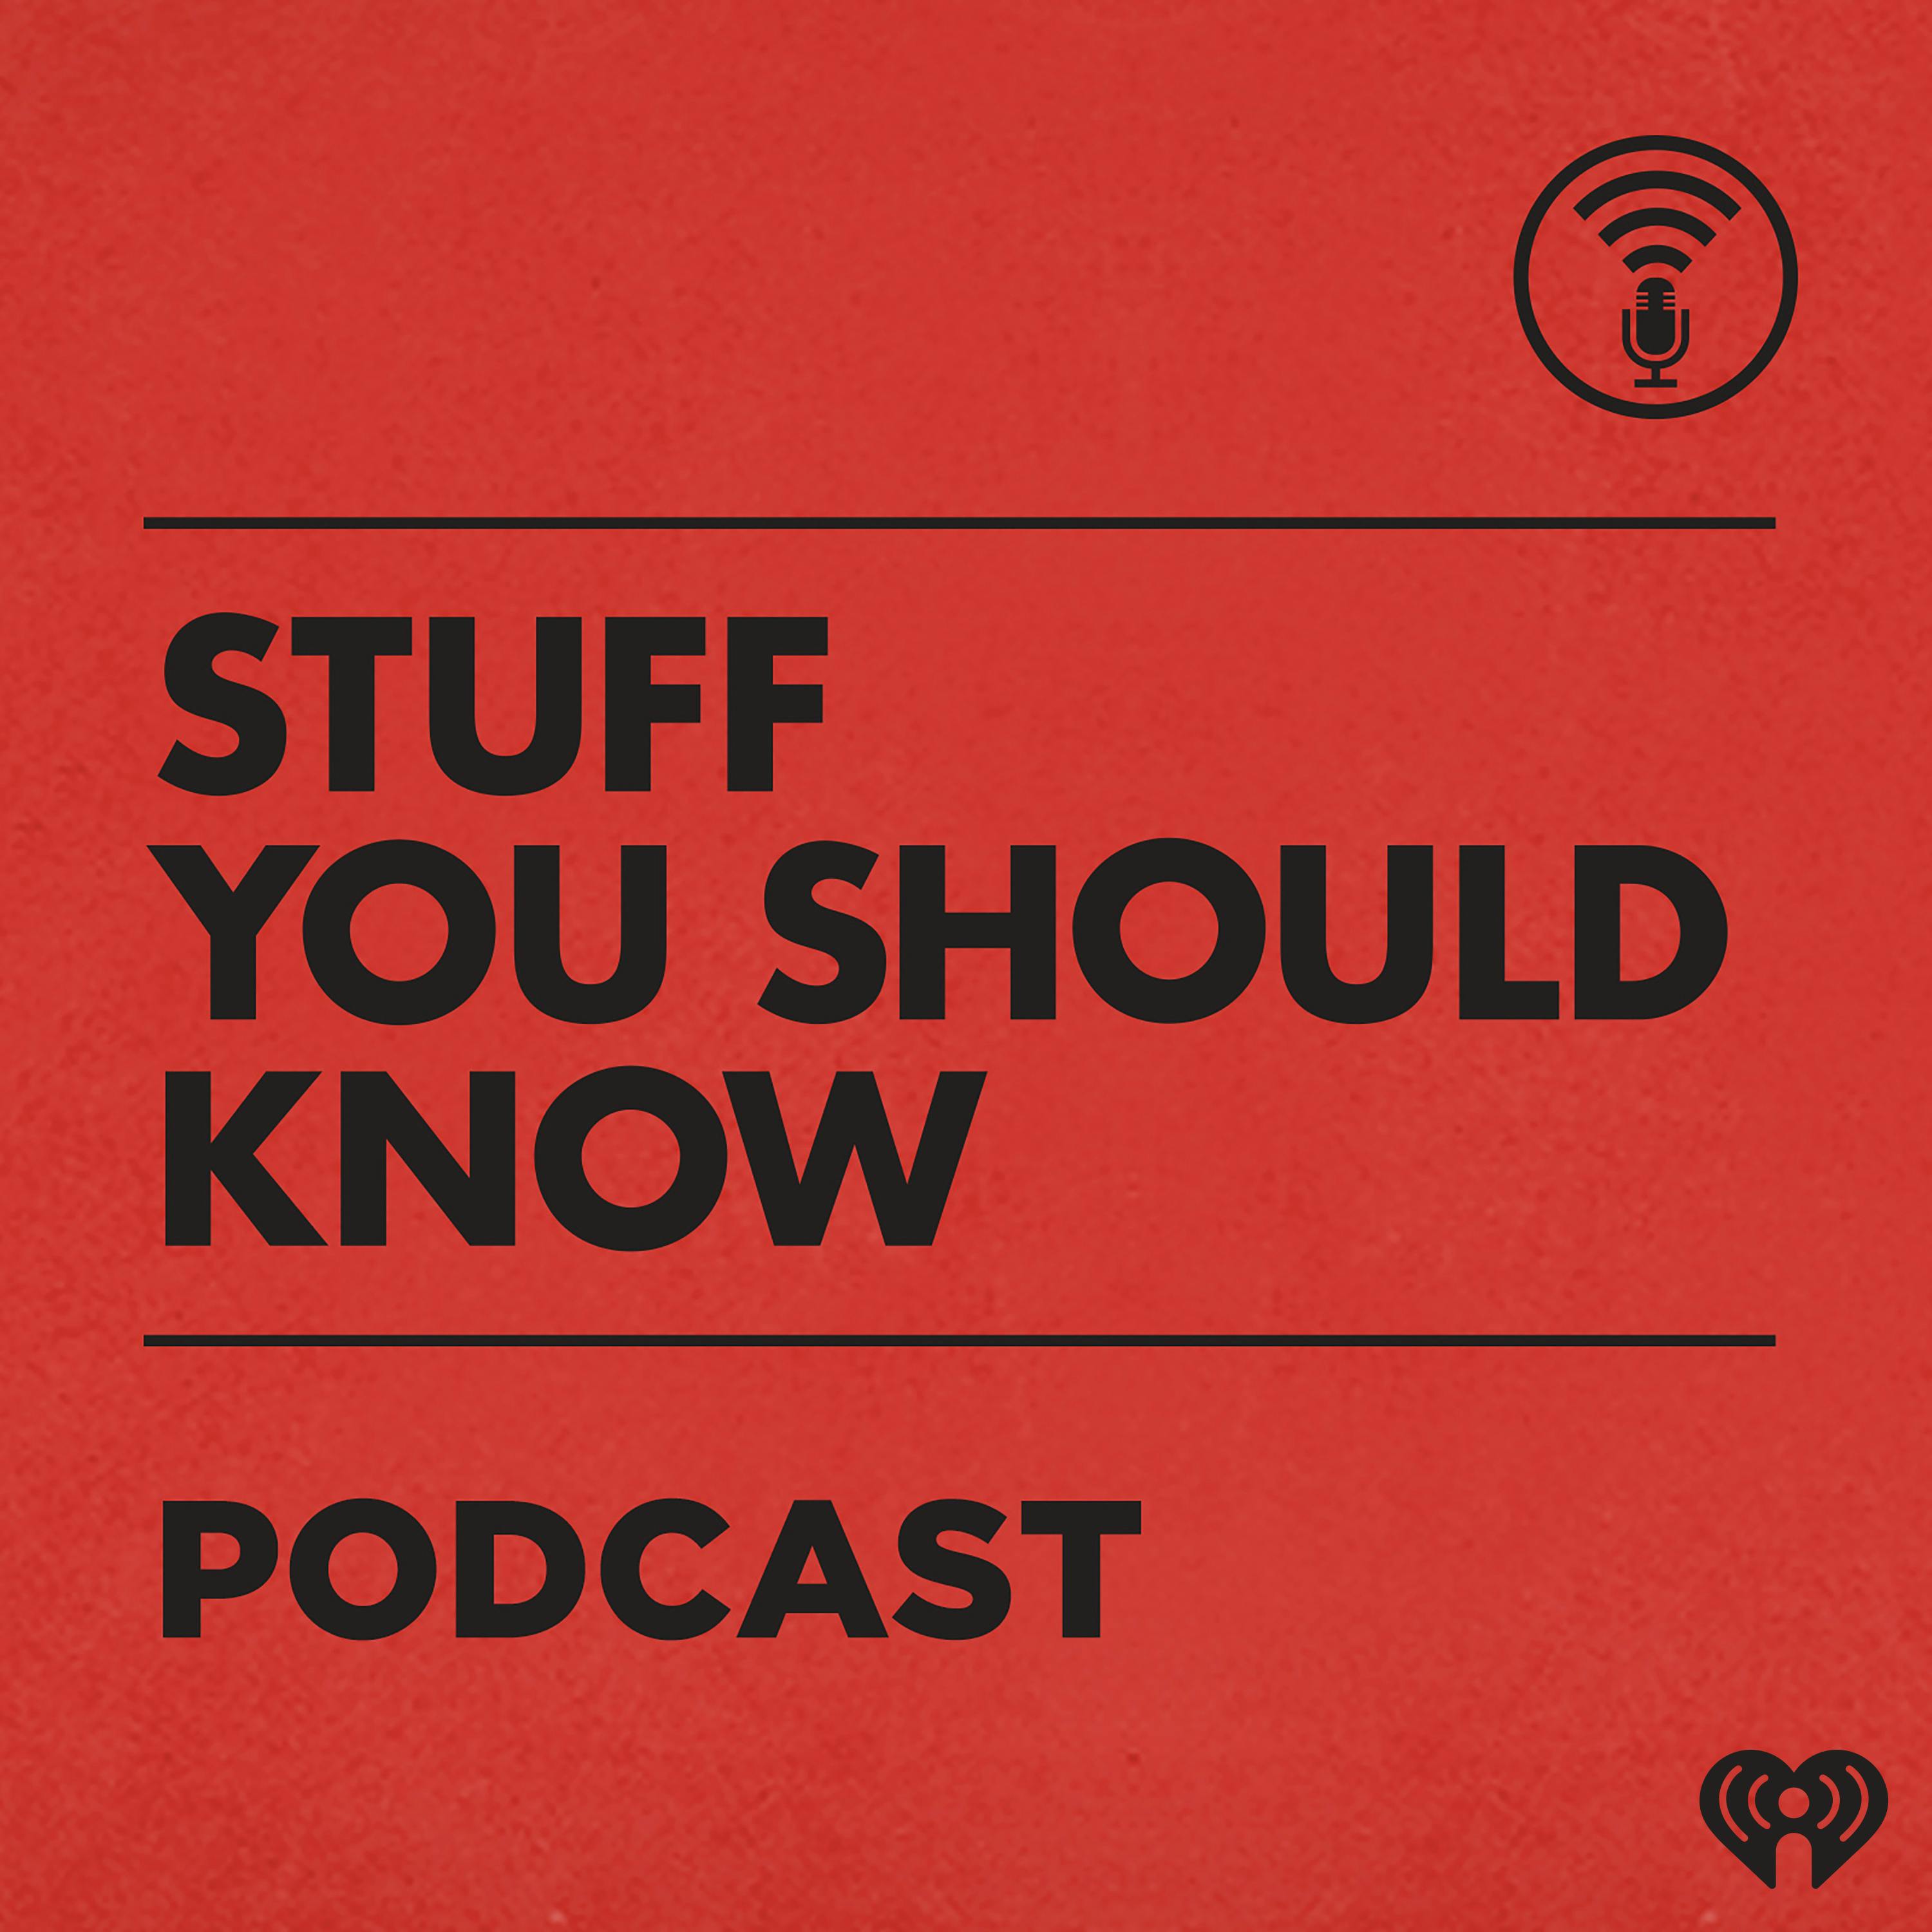 Stuff You Should Know Podcast Addict